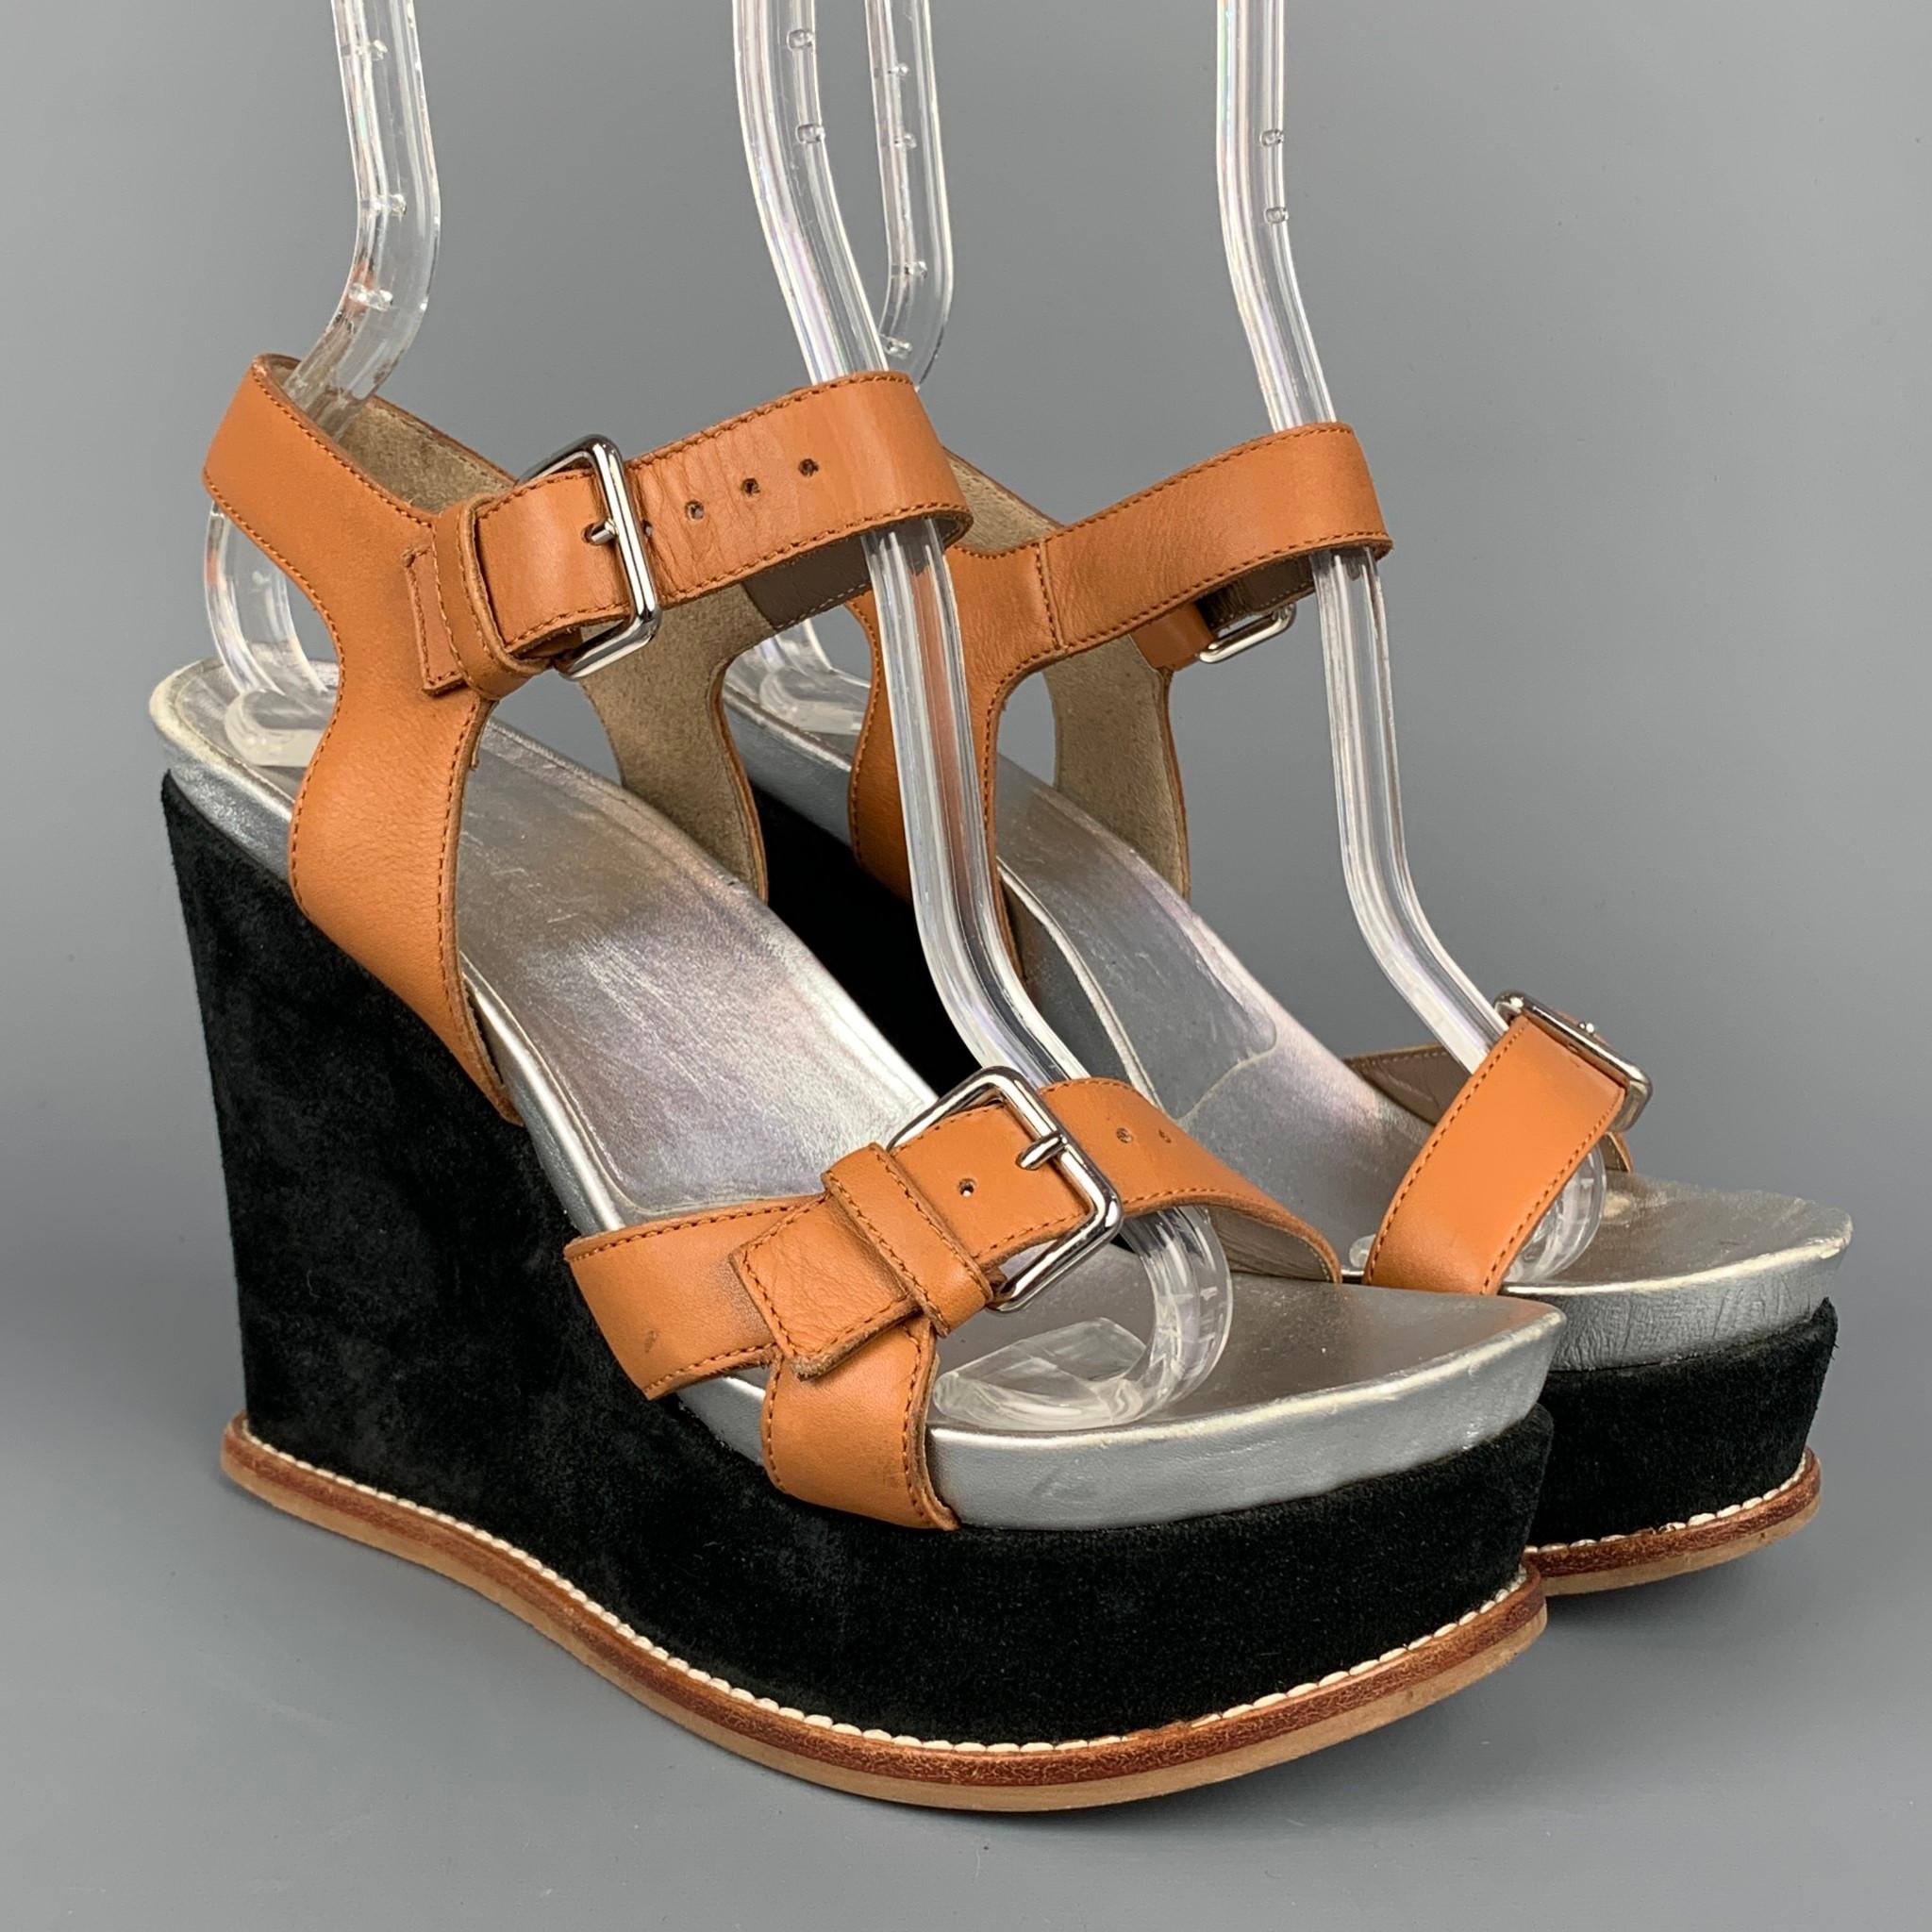 MARNI sandals comes in a tan leather with a silver interior featuring a ankle strap, rubber sole, and a black velvet wedge heel. Made in Italy.

Very Good Pre-Owned Condition.
Marked: Size not visible
Original Retail Price: